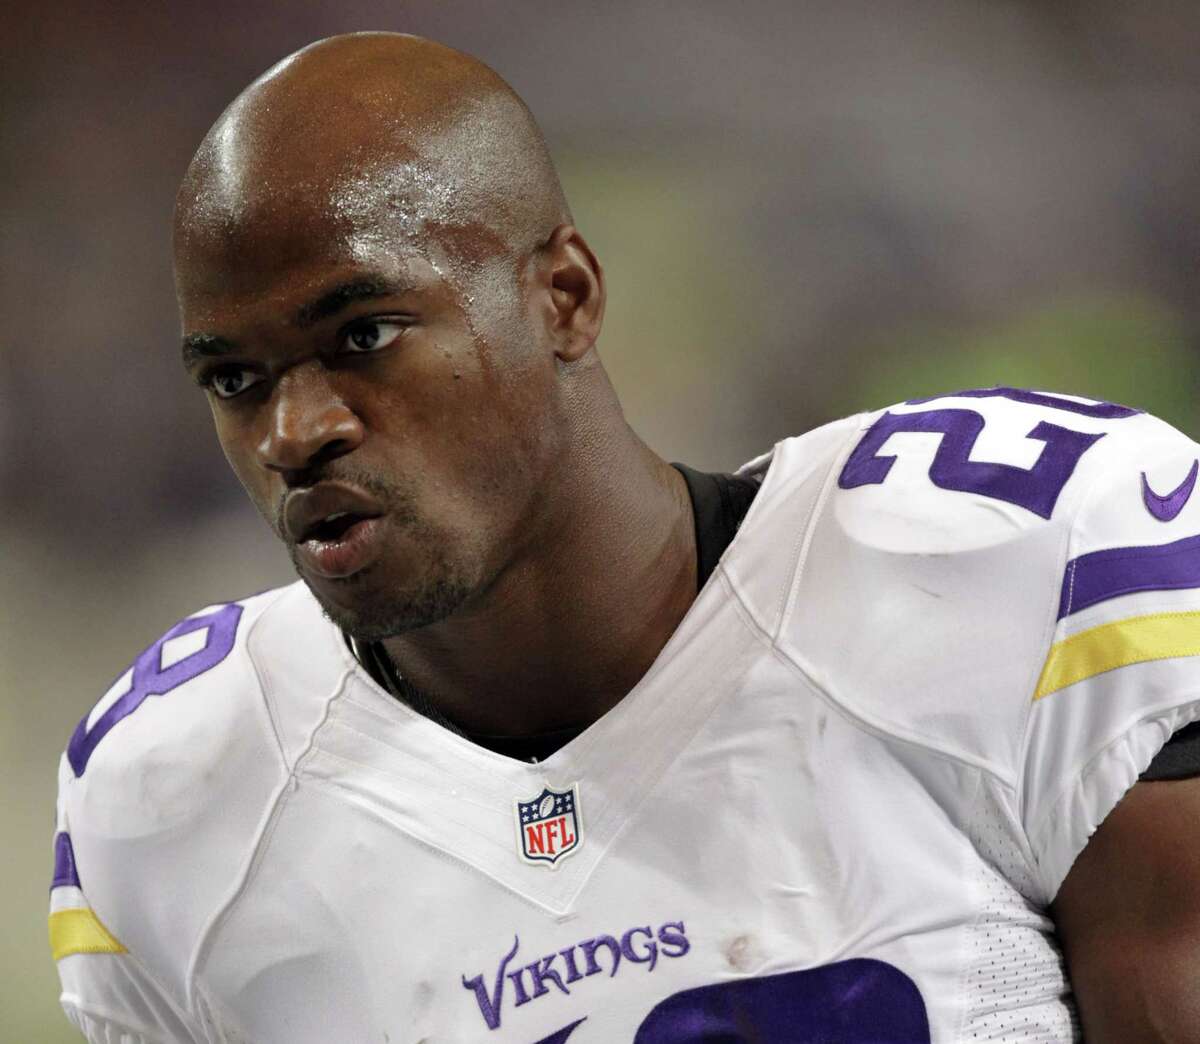 Adrian Peterson and the Vikings have reached a standstill in their relationship. Peterson’s agent, Ben Dogra, said in an interview on Tuesday that he believes a return to Minnesota this season is not in the “best interest” of the standout running back.